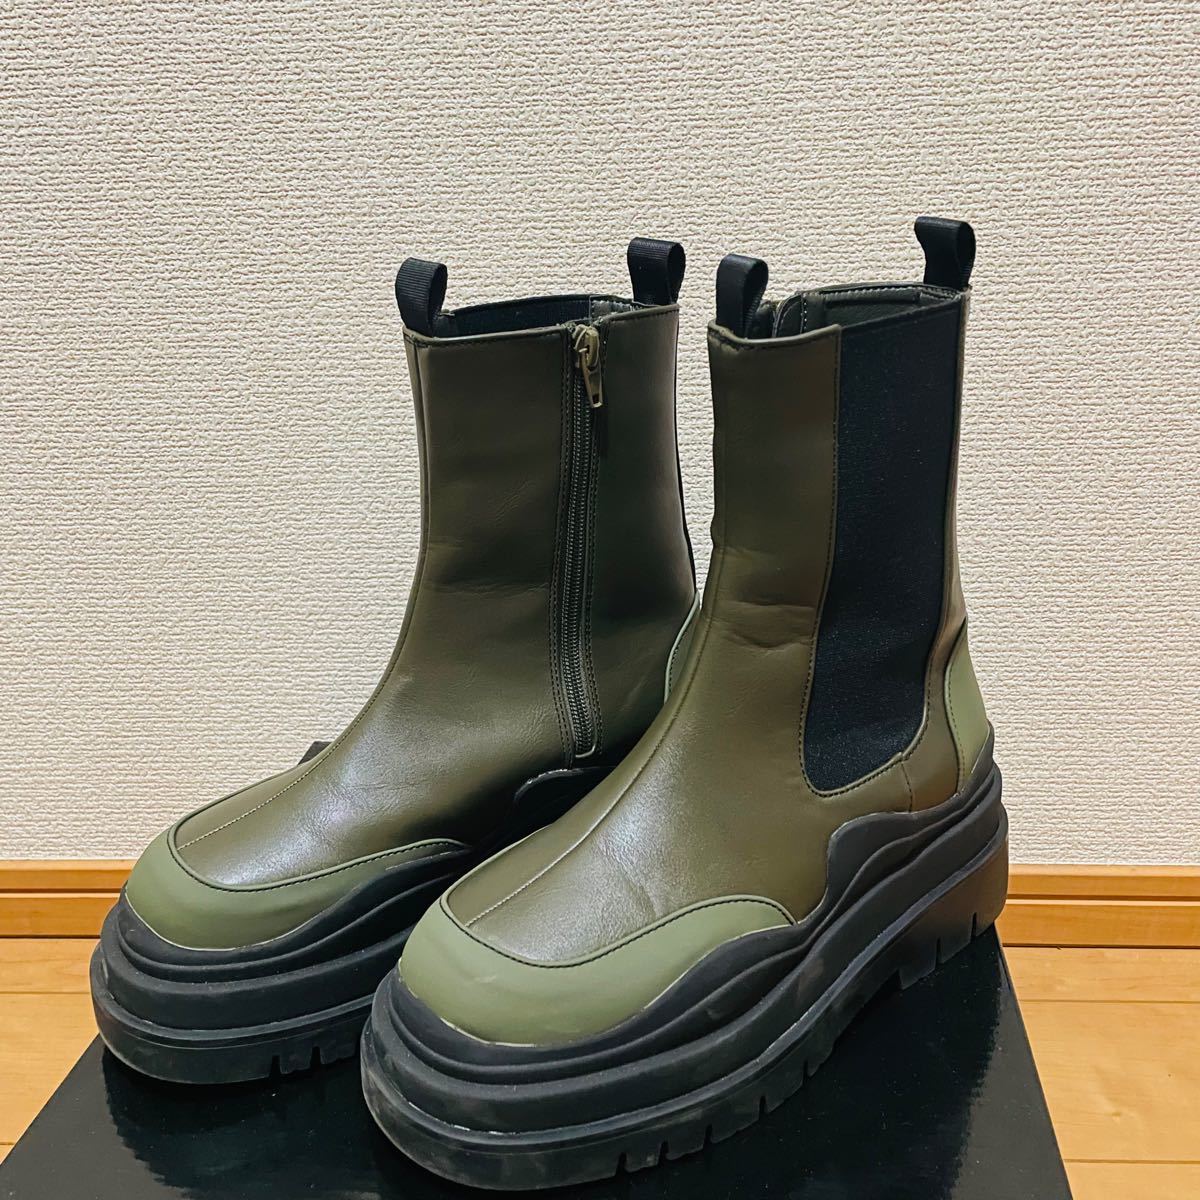 CONTRAST COLOR SOLE BOOTSコントラストカラーソールブーツ｜PayPayフリマ